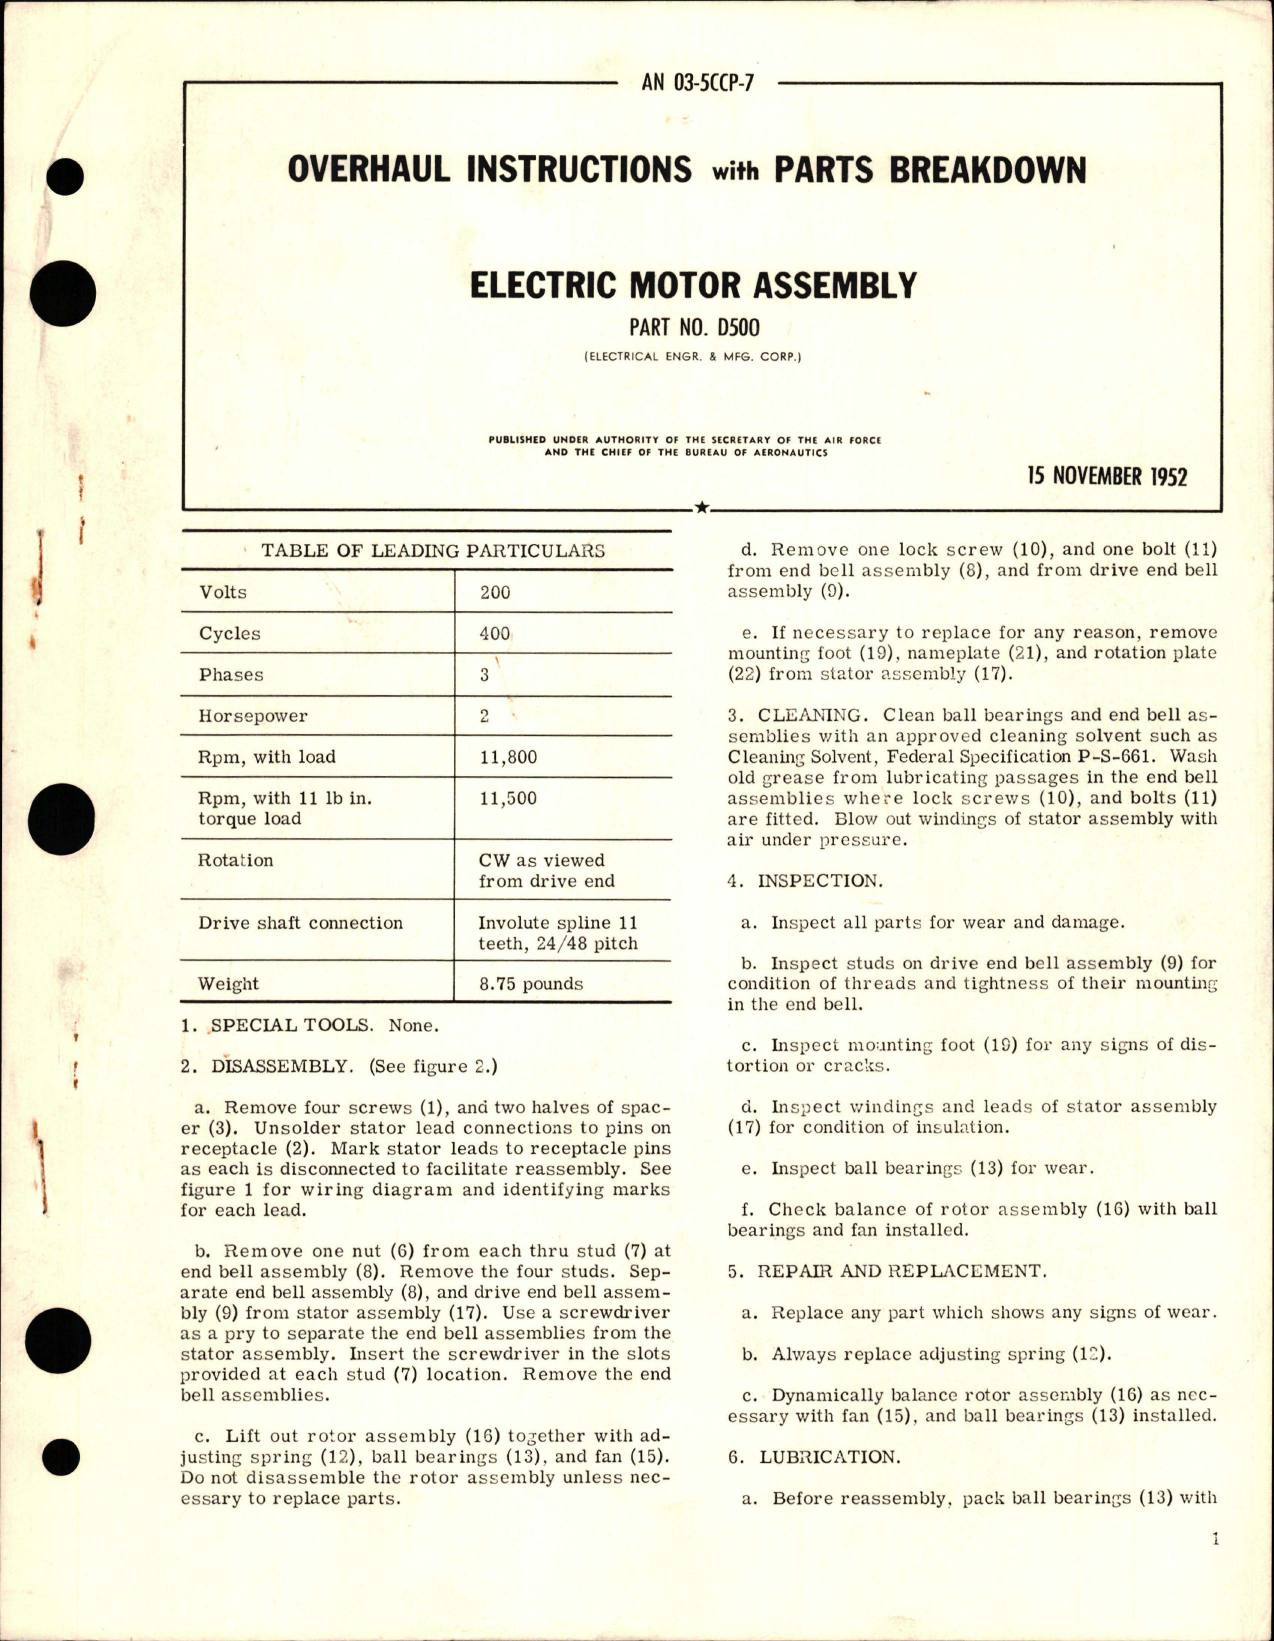 Sample page 1 from AirCorps Library document: Overhaul Instructions with Parts Breakdown for Electric Motor Assembly - Part D500 